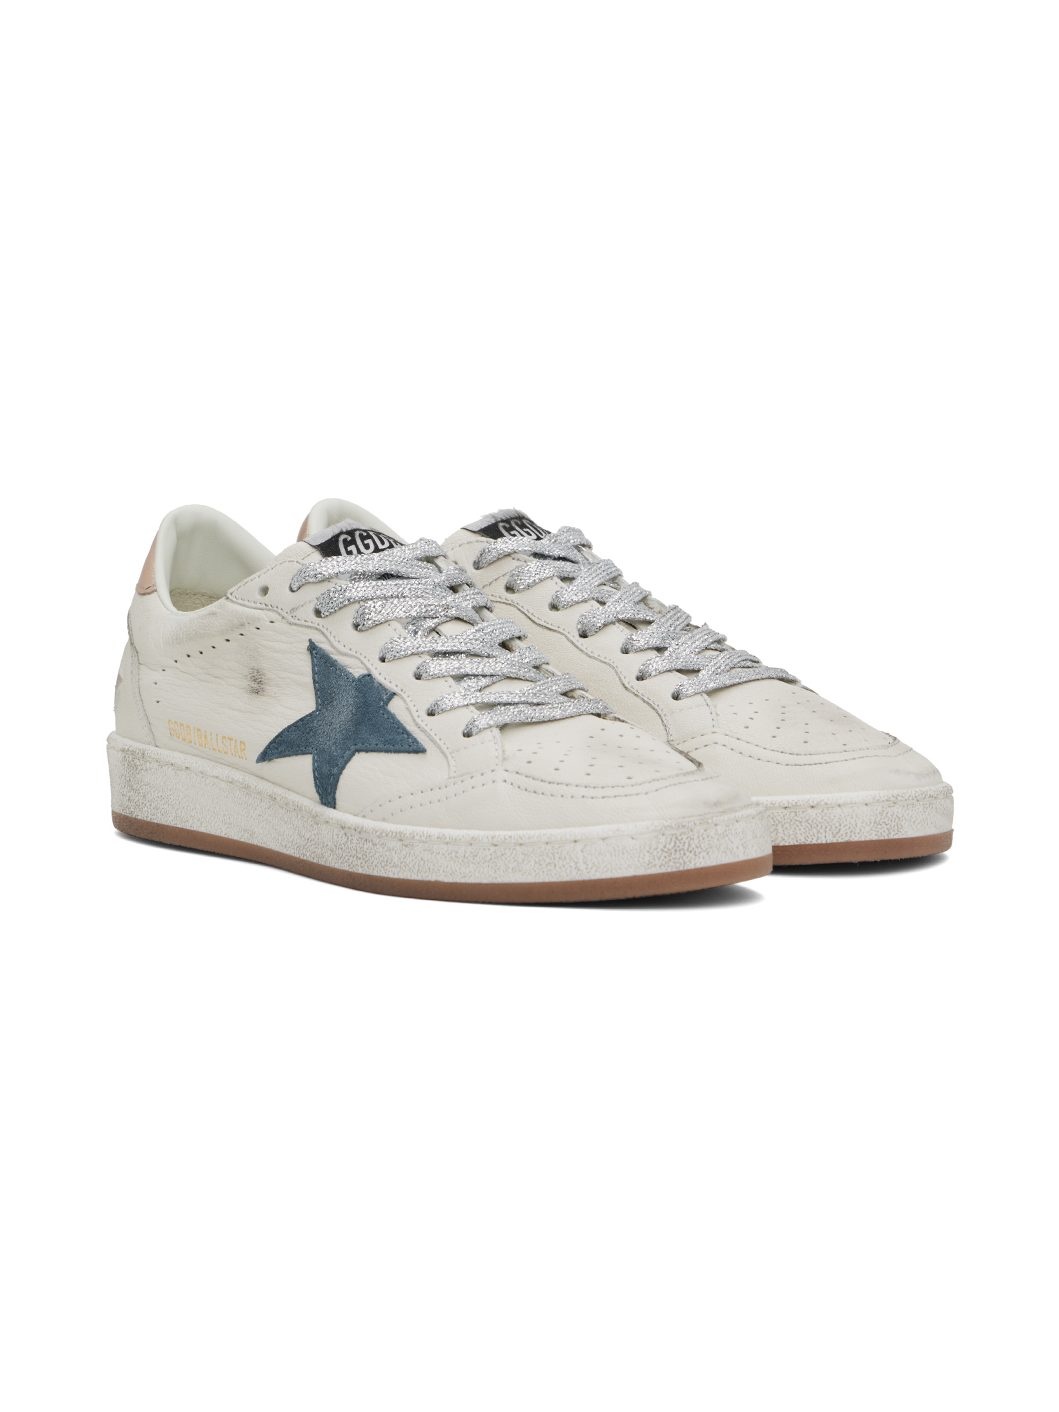 Off-White Ball Star Sneakers - 4